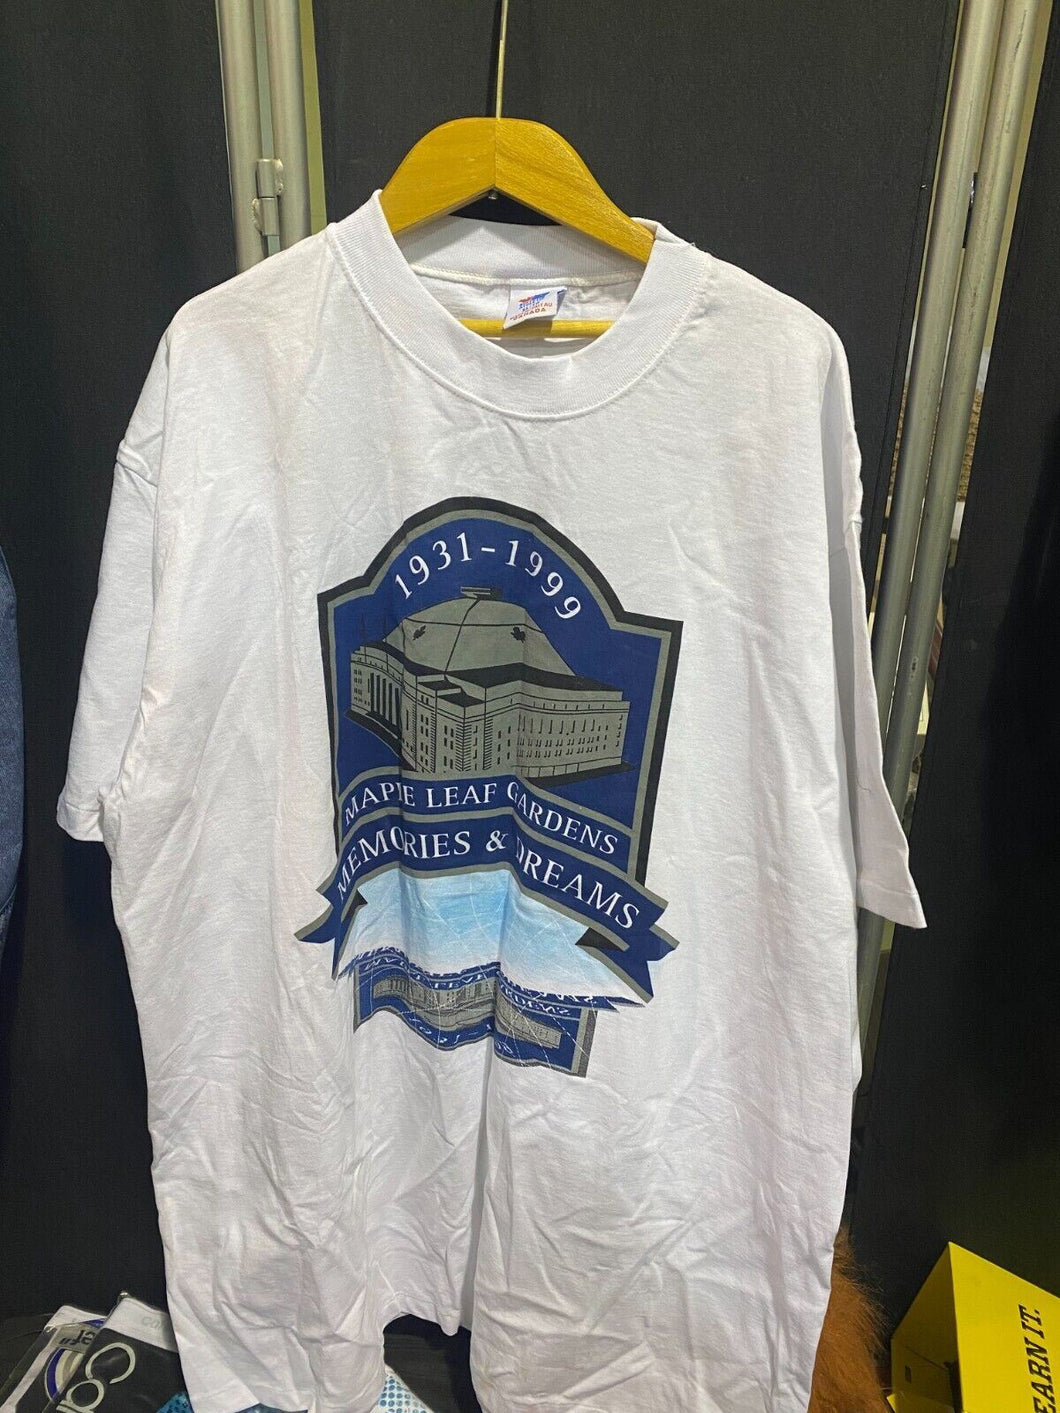 1931-1999 Maple Leaf Gardens Memories and Dreams T-Shirt size XL